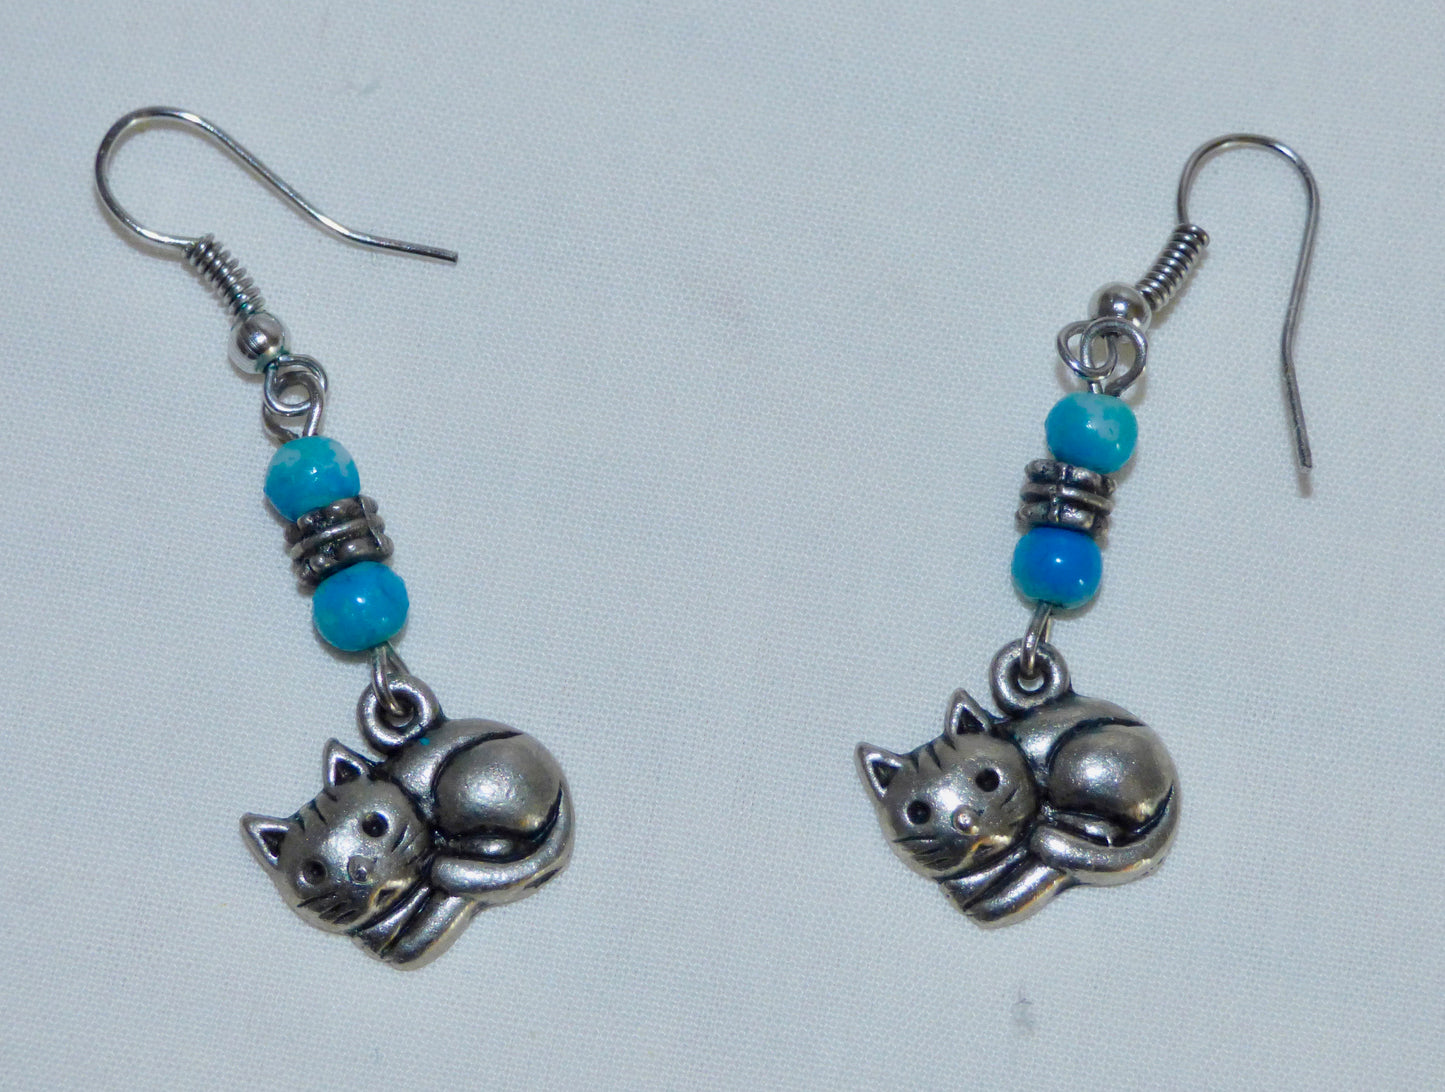 Silver Coloured Metal Cat Dangle And Drop Earrings With Blue Coloured Beads